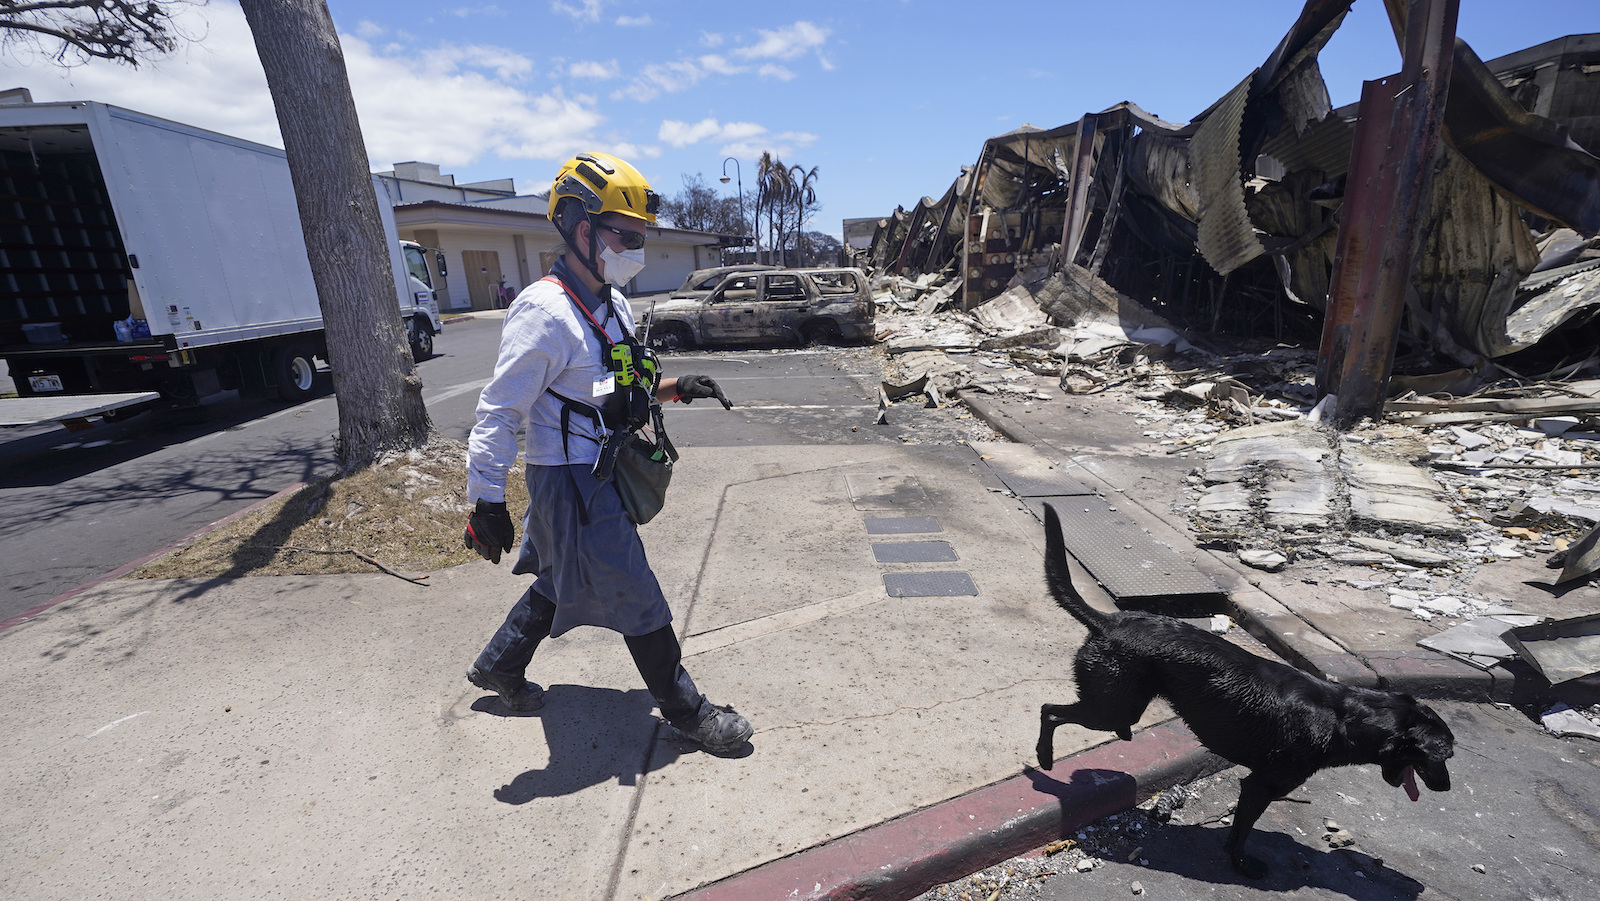 a person in protective medical gear and a dog walk on a burned street